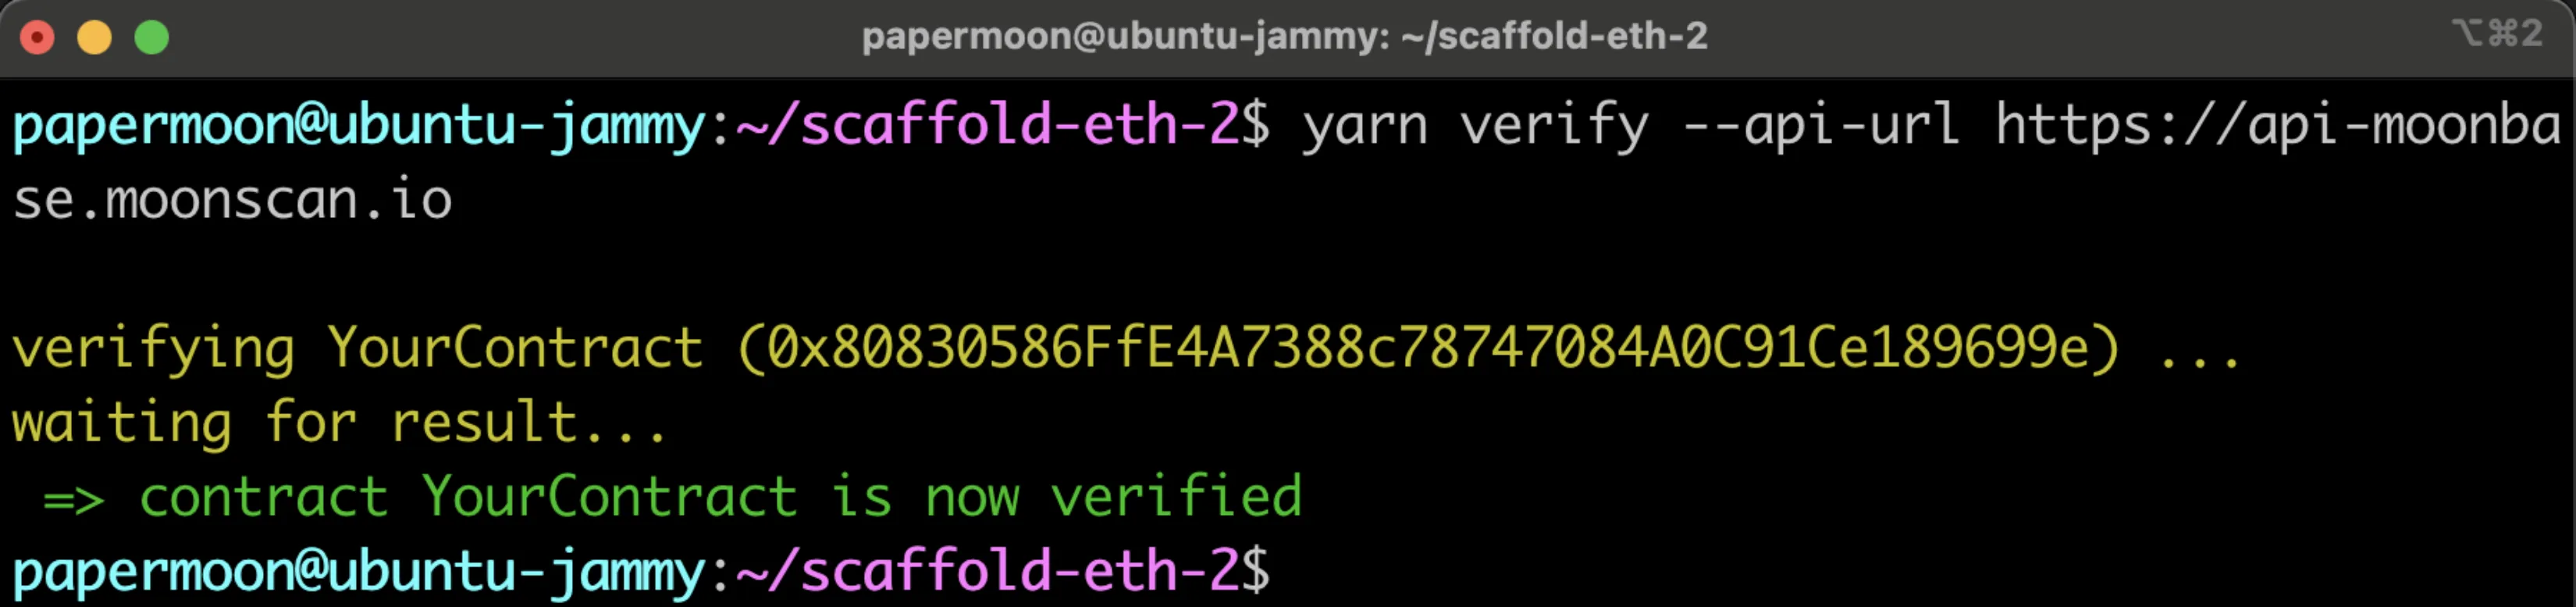 The terminal outut from running the verify command.